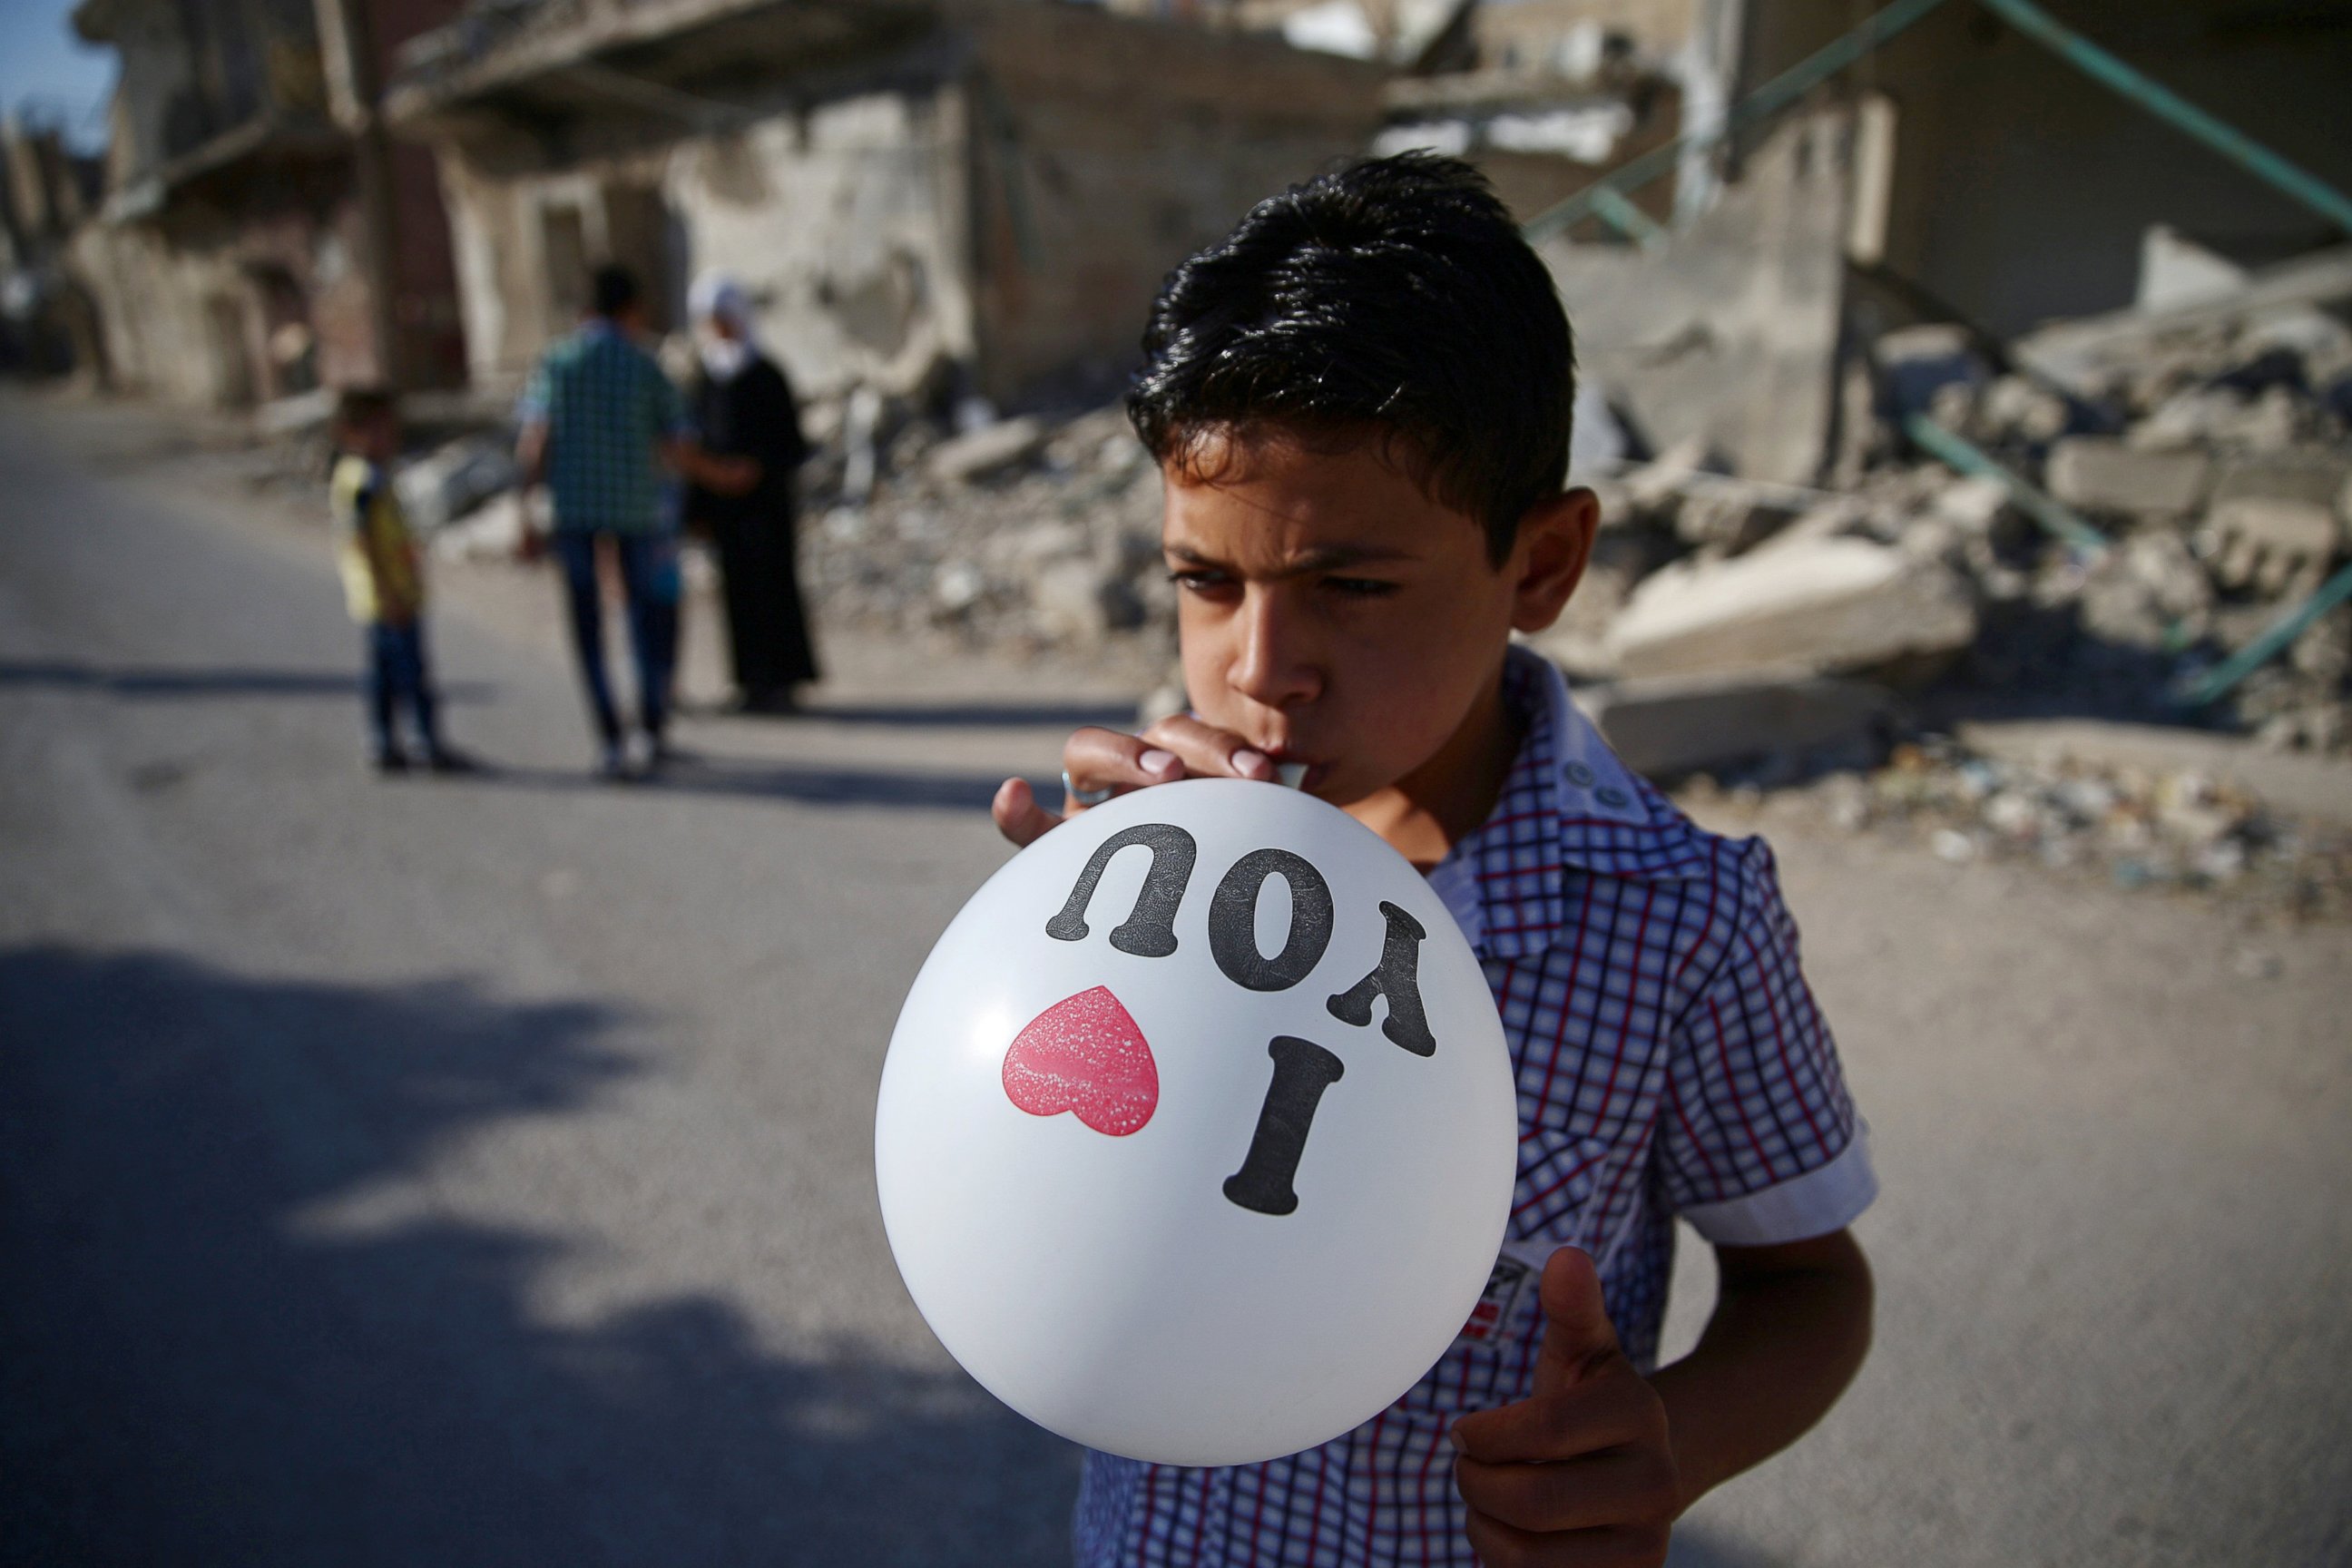 PHOTO: A boy inflates a balloon on the first day of the Muslim holiday of Eid al-Fitr, which marks the end of the holy month of Ramadan, in the rebel held Douma neighborhood of Damascus, Syria July 6, 2016.